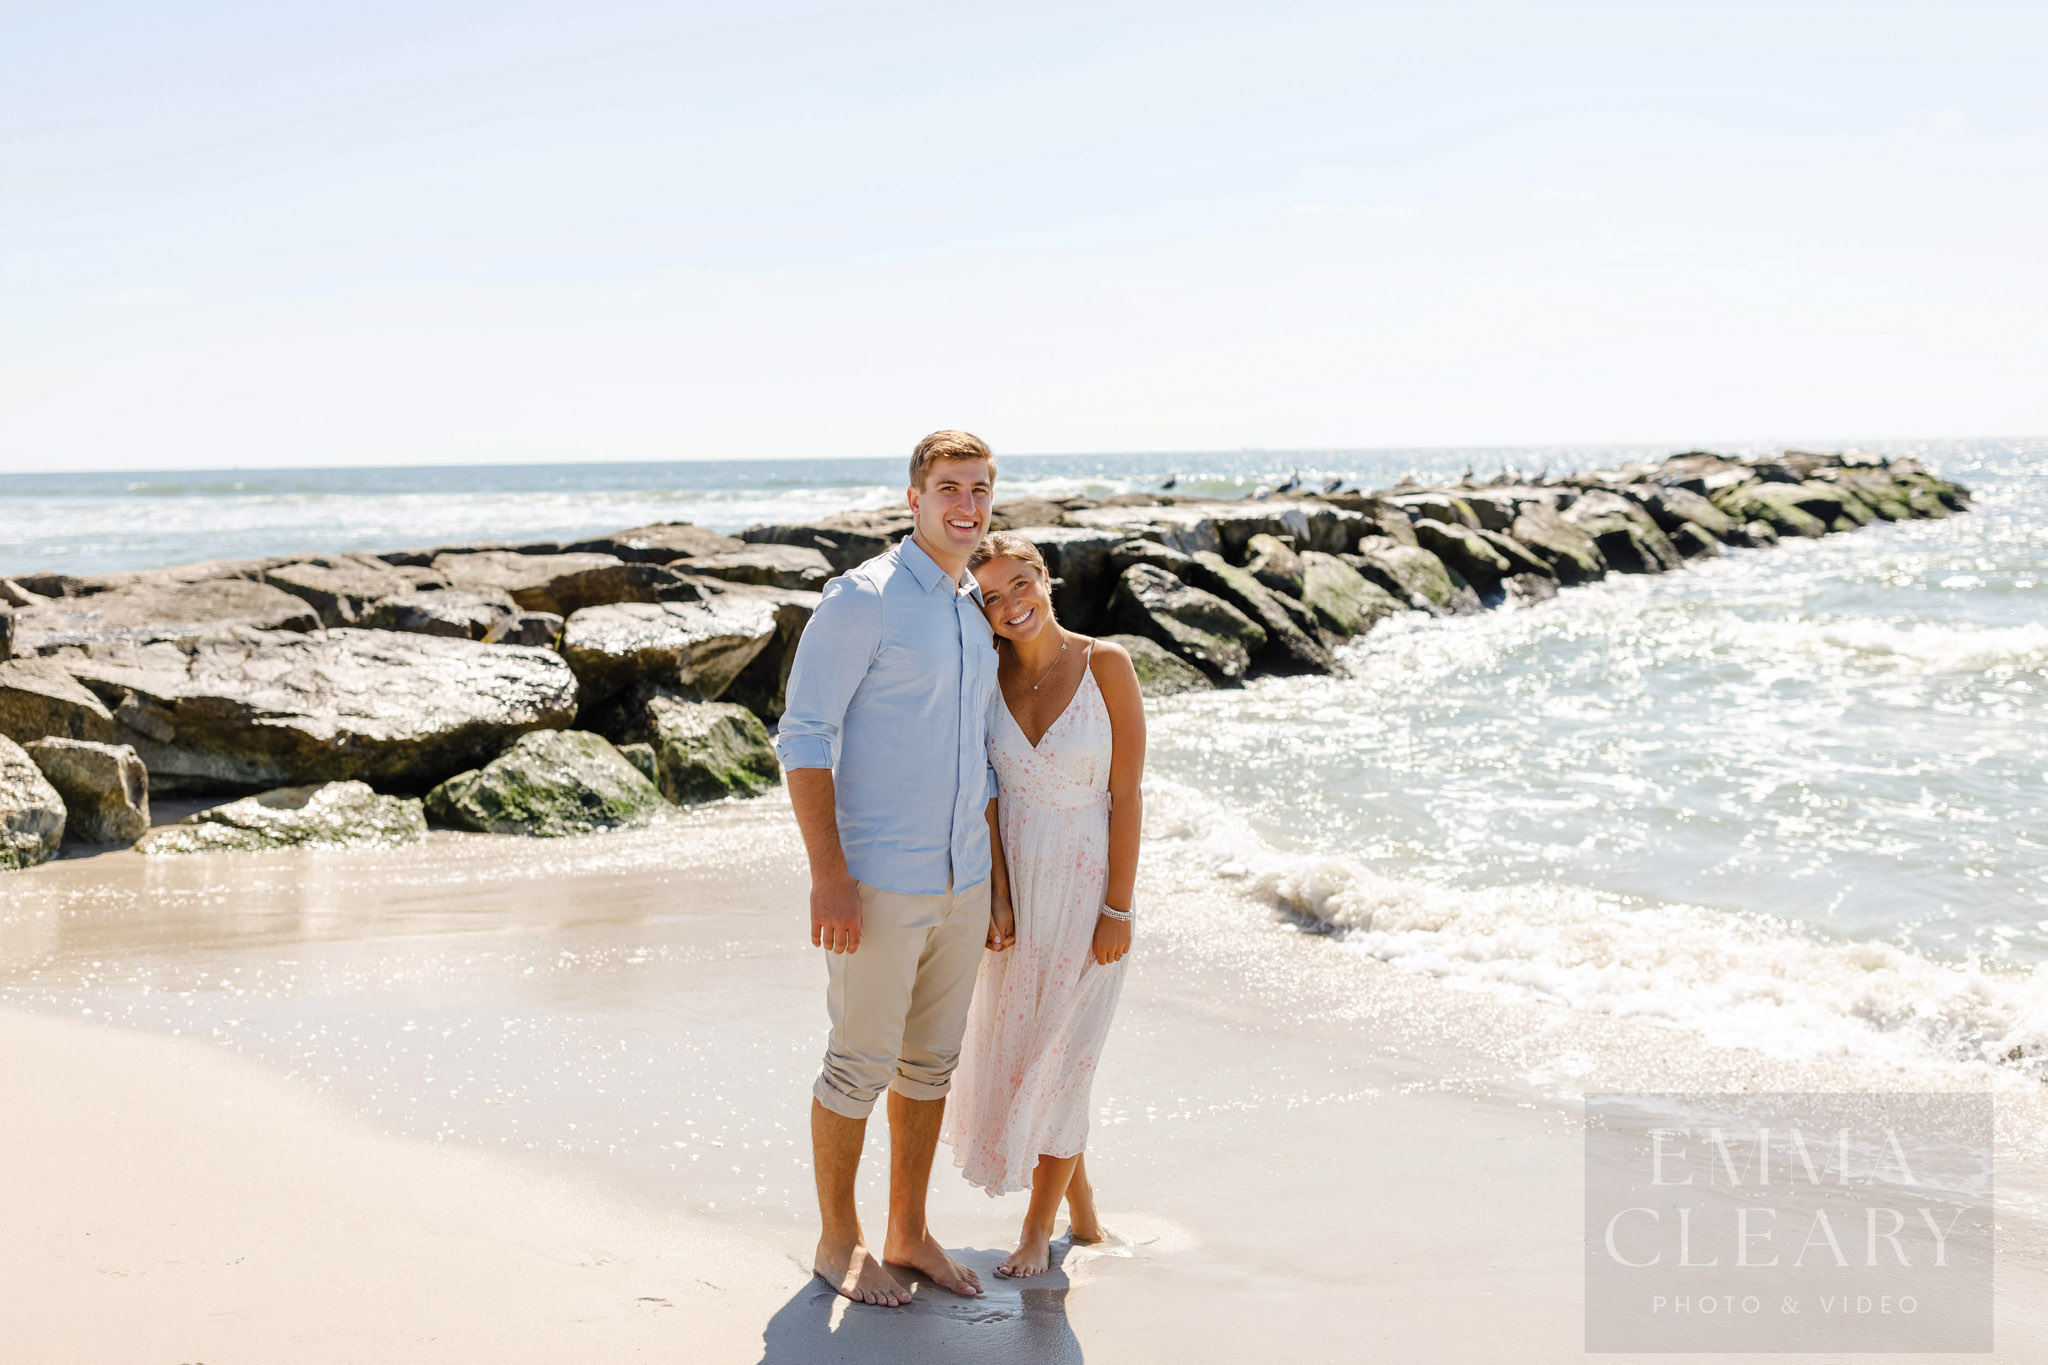 Engagement photo shoot by the sea